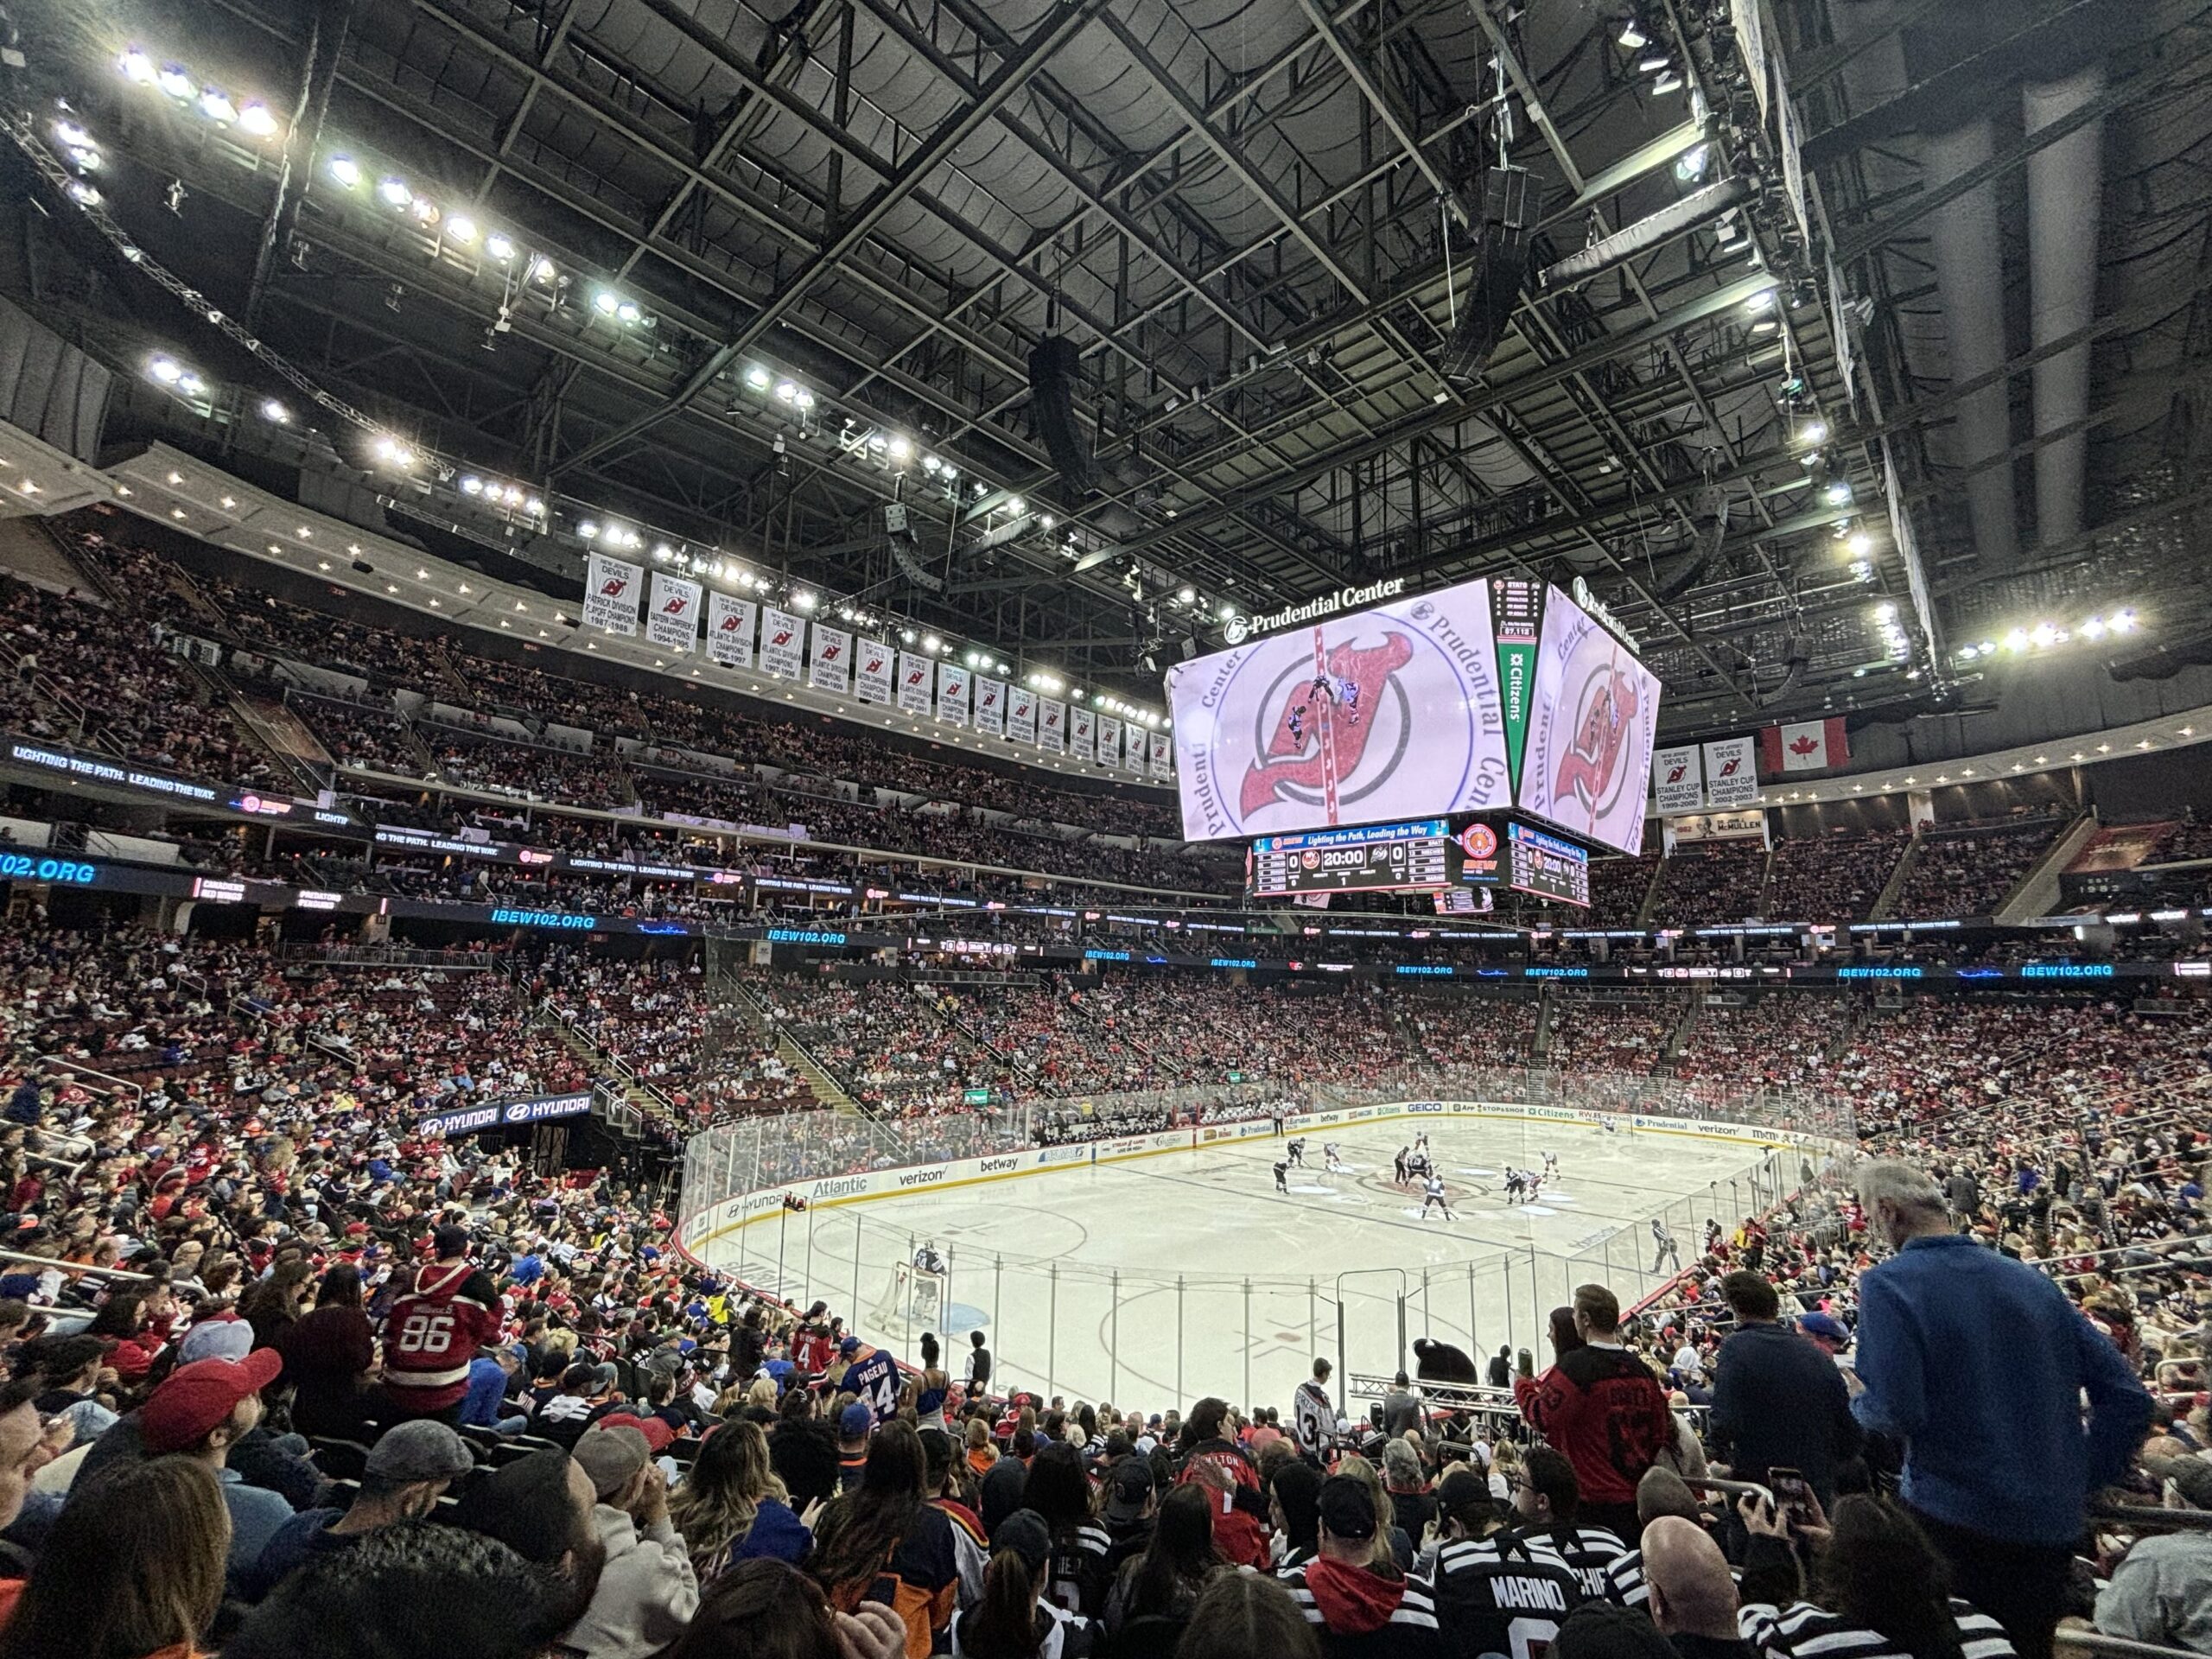 The Prudential Center was filled with fans of both the Devils and New York Islanders for New Jersey's home season finale in mid-April. Photo by Matt Traub/SportsTravel